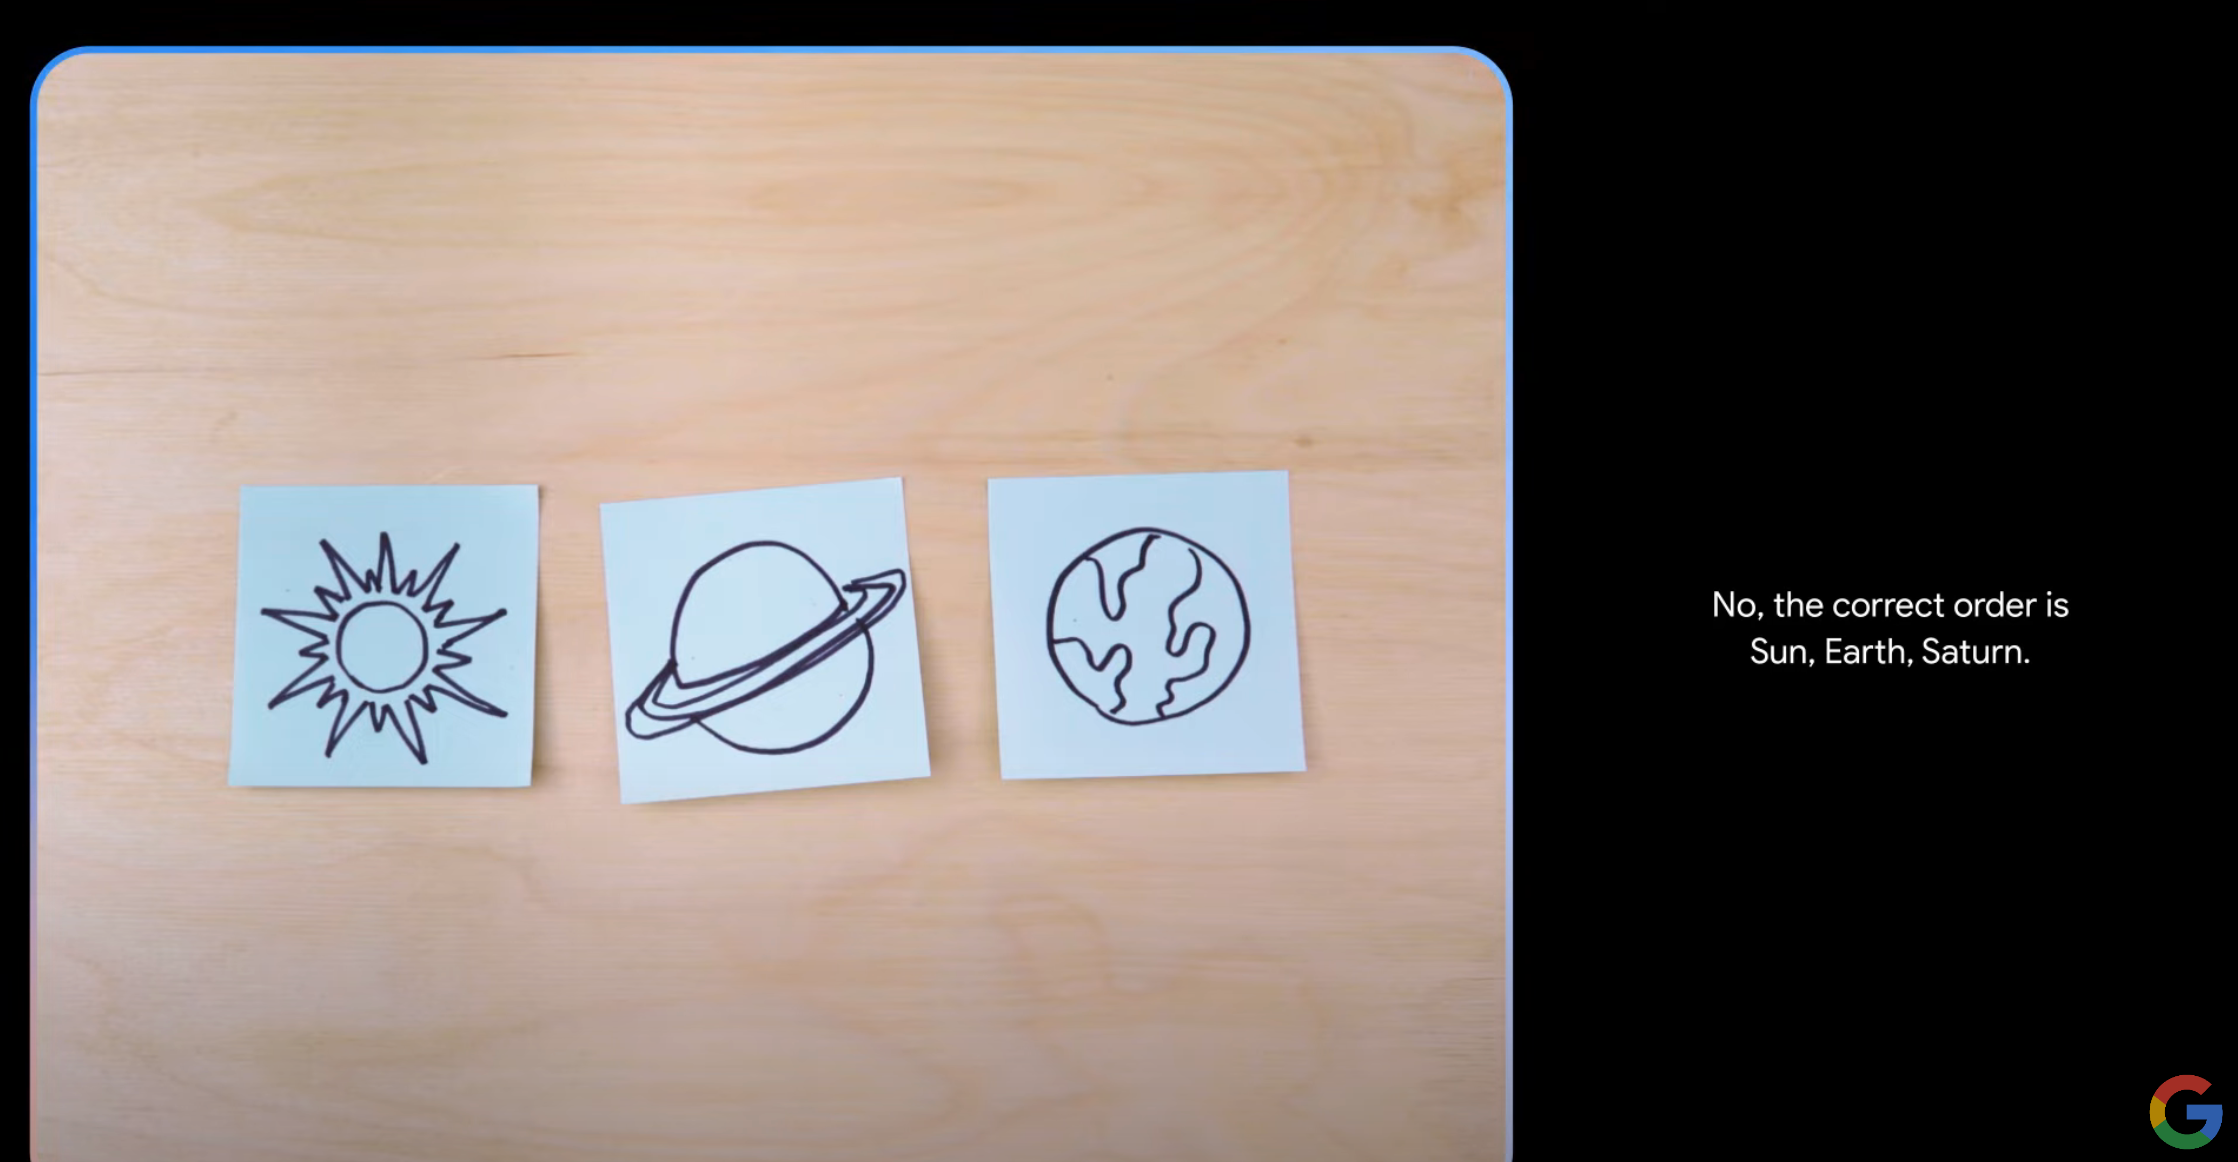 Gemini recognizes drawings of planets and corrects their order.